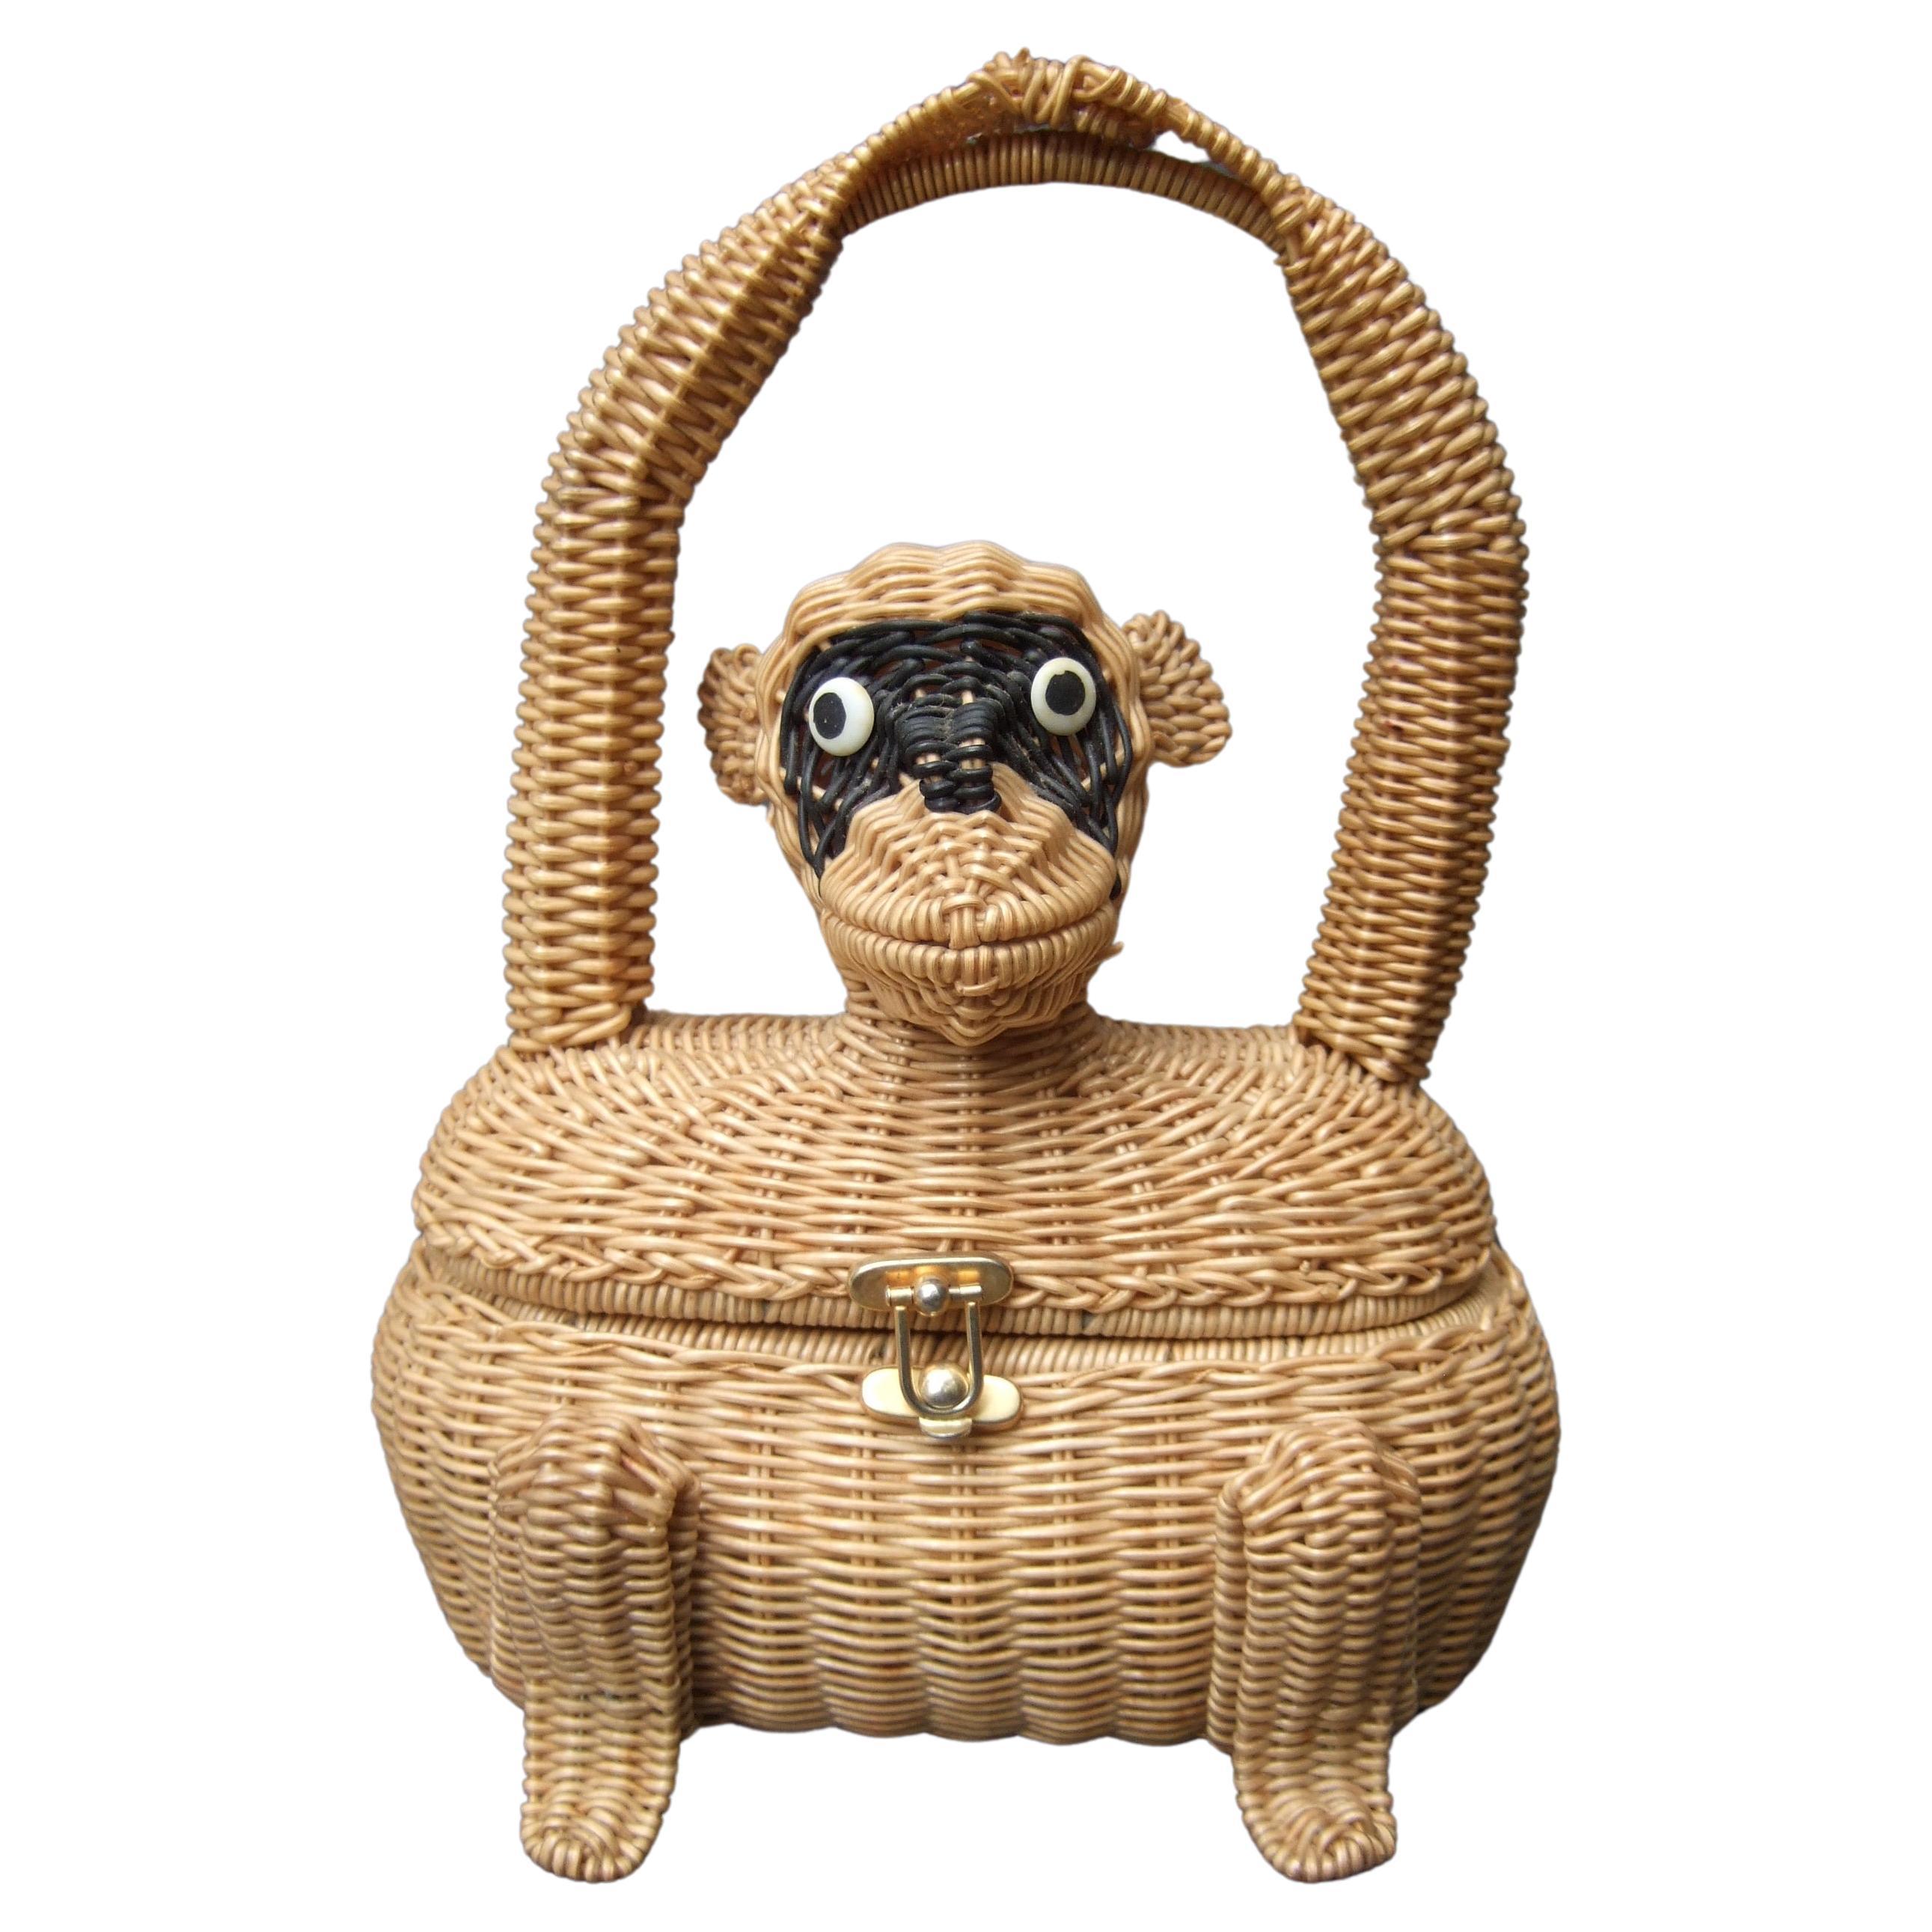 Whimsical Very Rare Wicker Monkey Handbag Designed by Marcus Brothers c 1960 For Sale